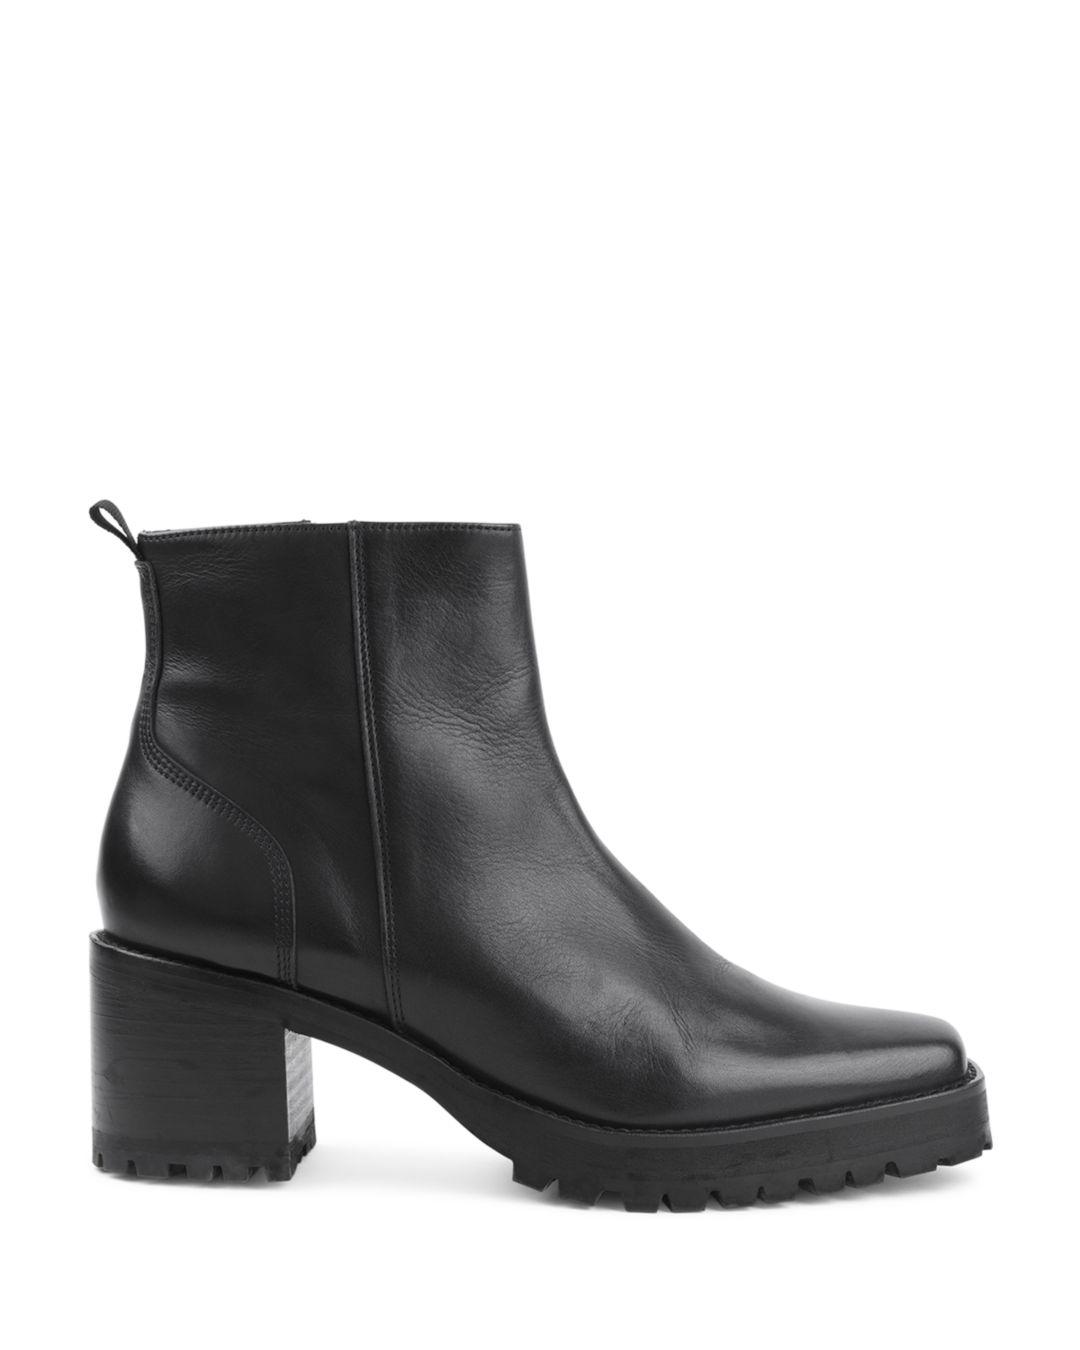 Andre Assous Leather Women's Milla Booties in Black - Lyst